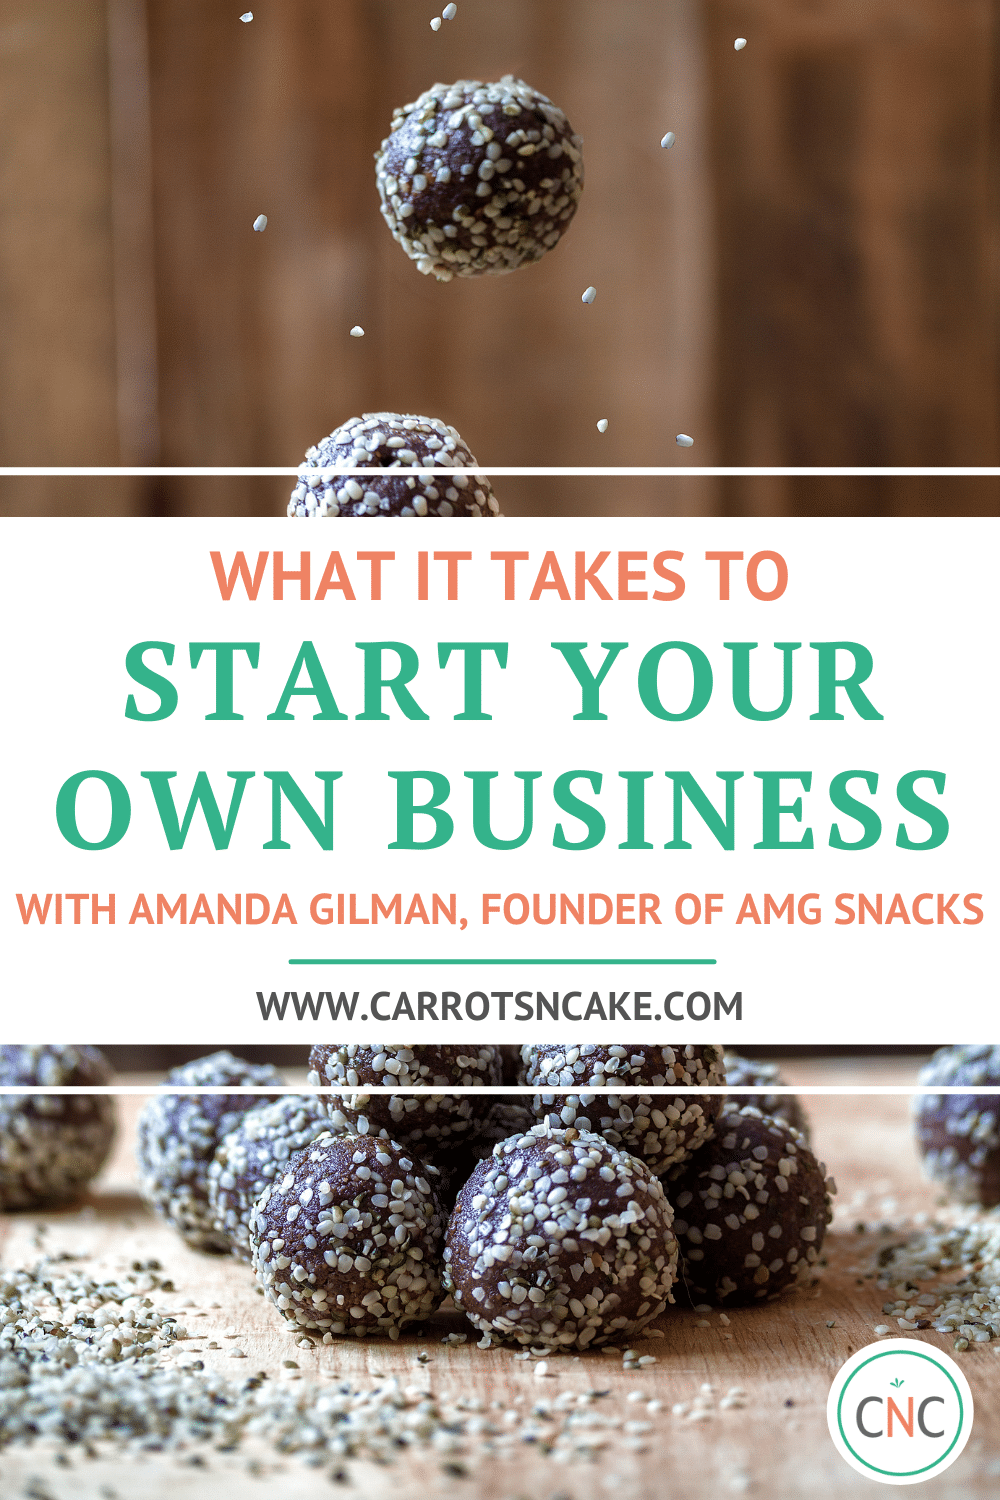 What it takes to start your own business with Amanda Gilman Founder of AMG Snacks